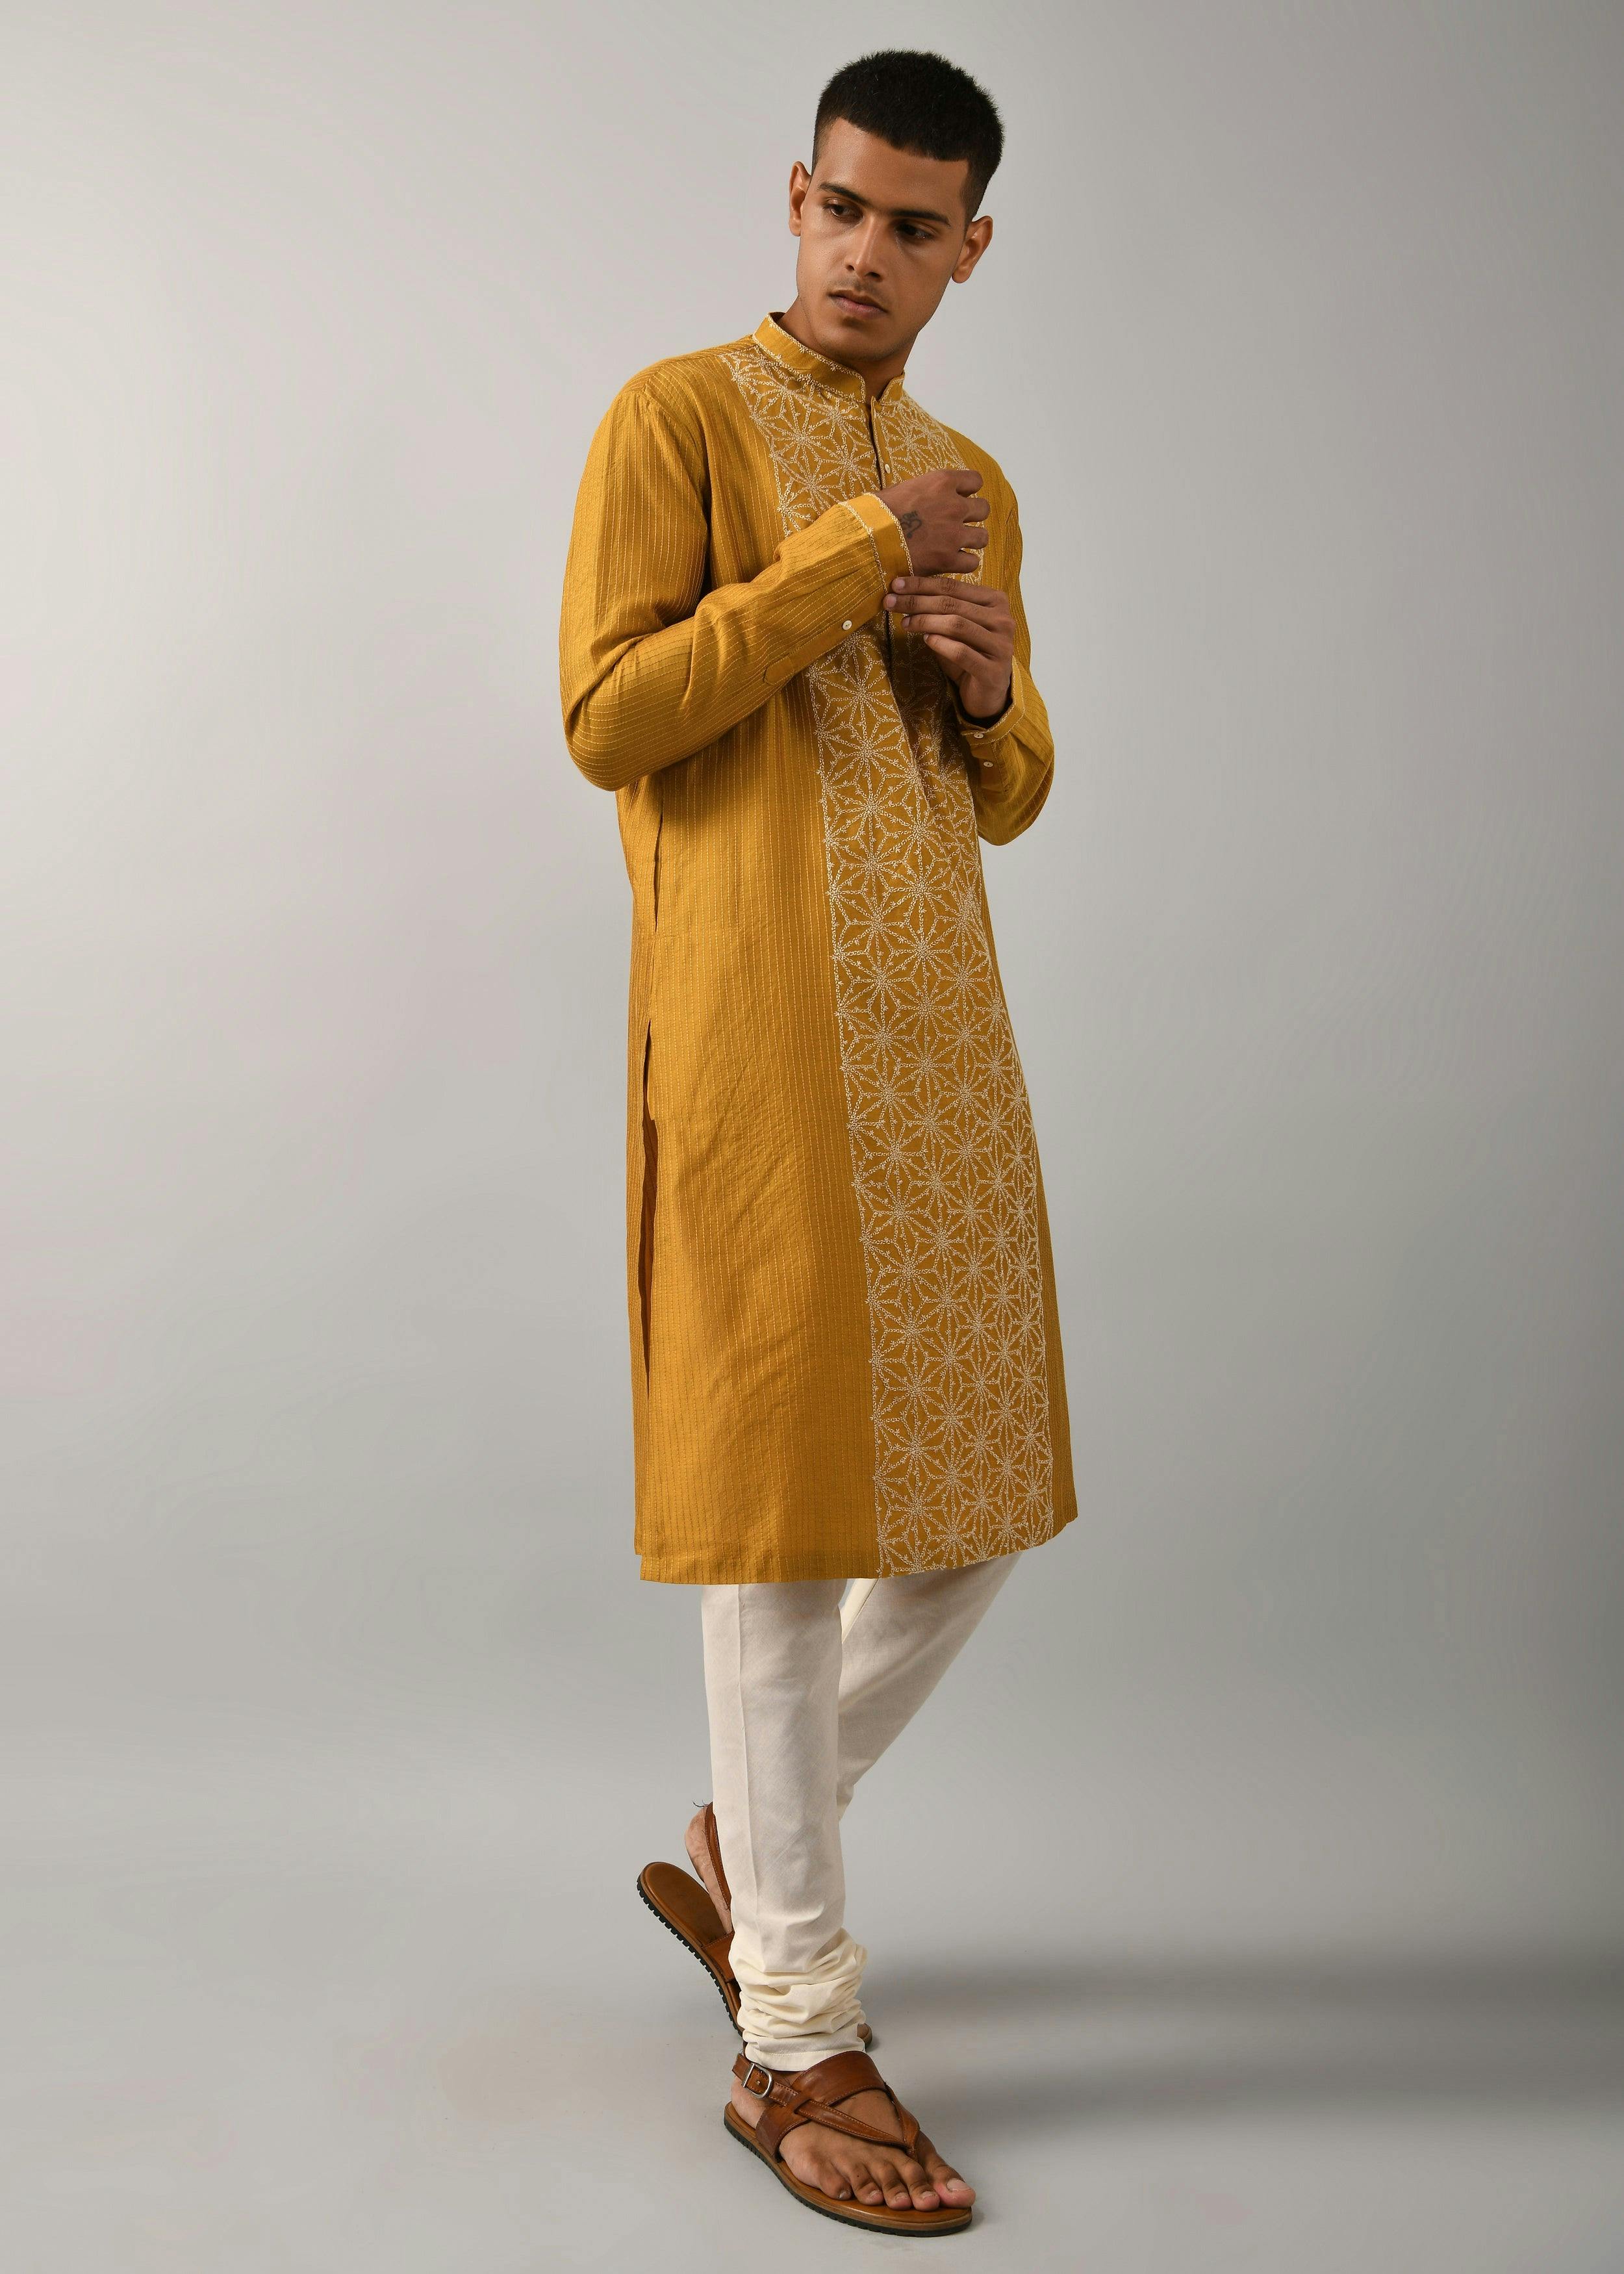 Dhruvtara Hand Embroidered Kurta Set, a product by Country Made